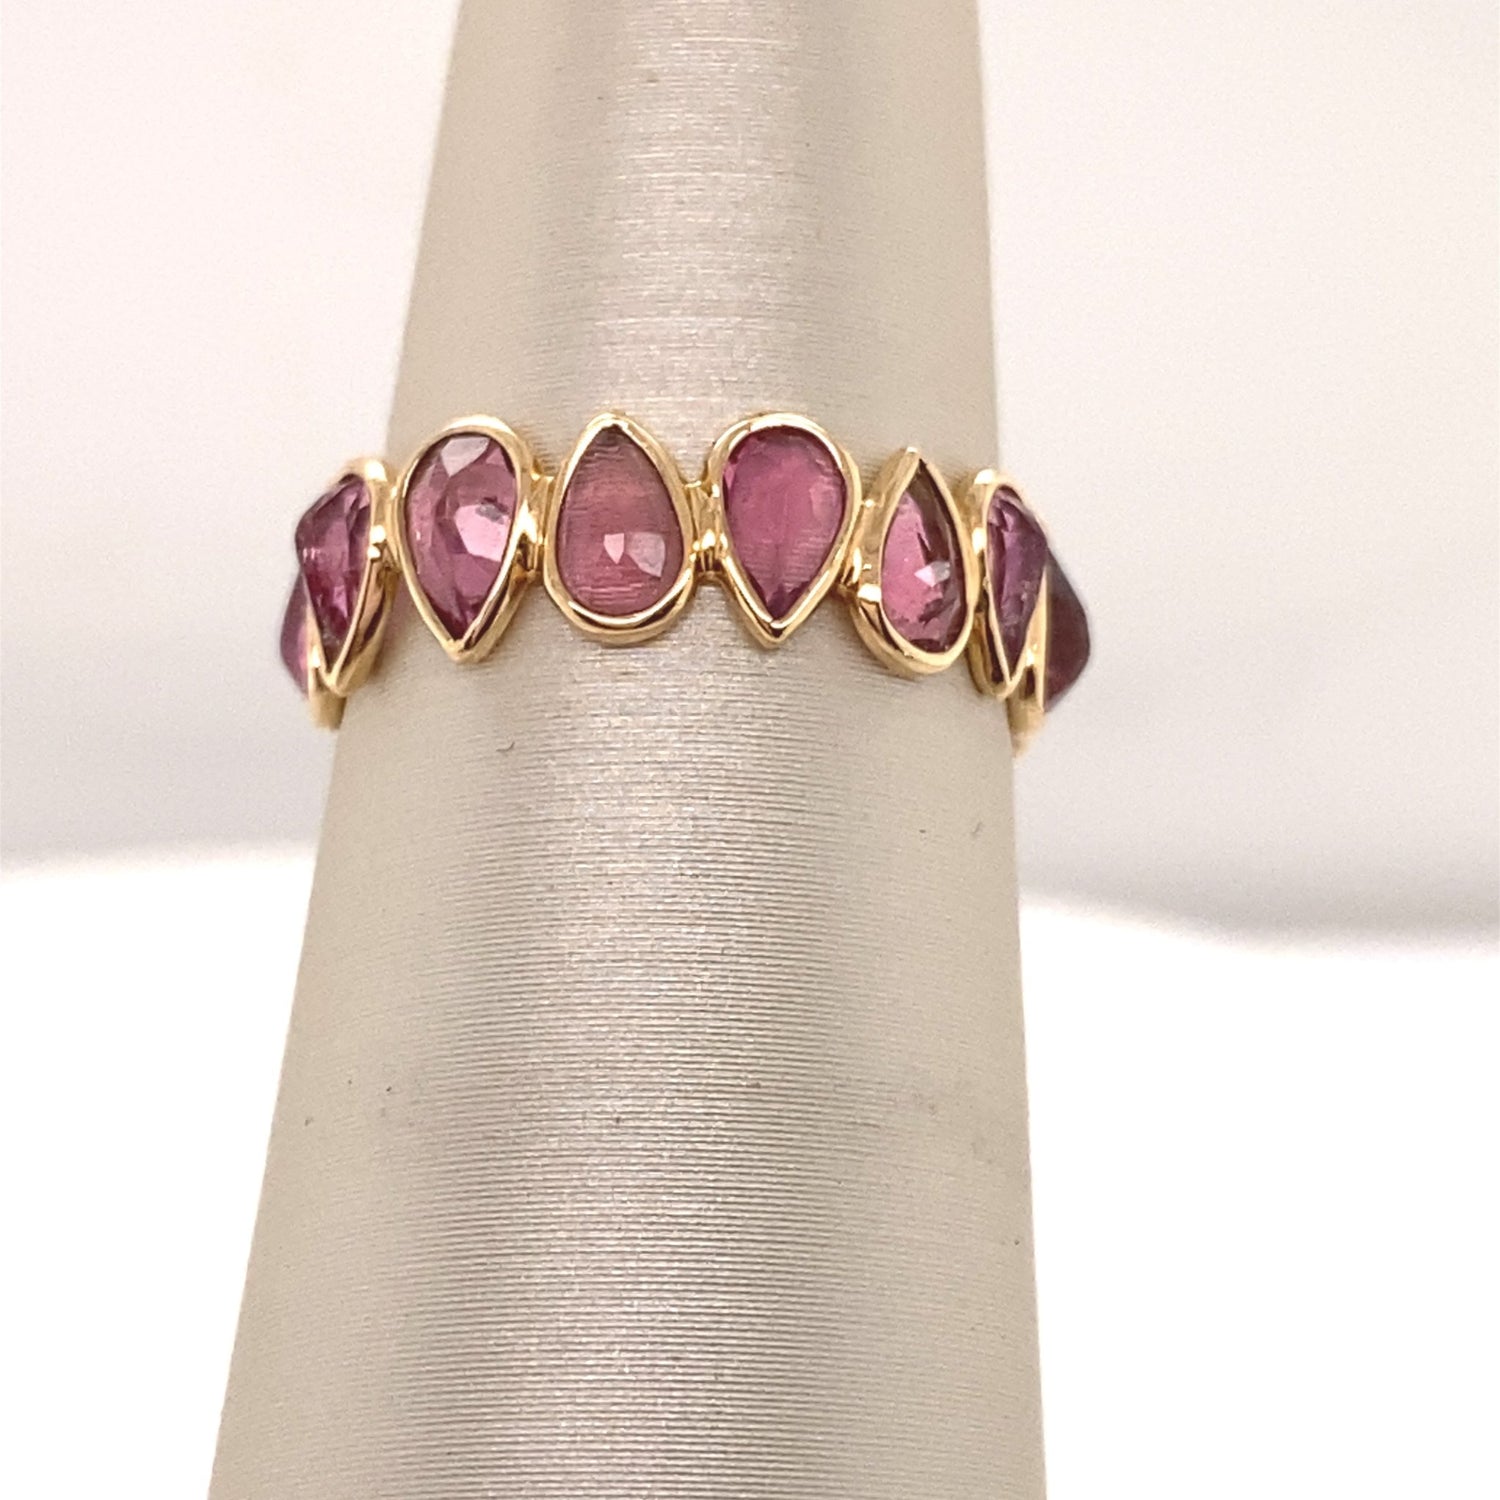 Ring- 14kt yg Sliced Pink Tourmaline Ring - Gaines Jewelers